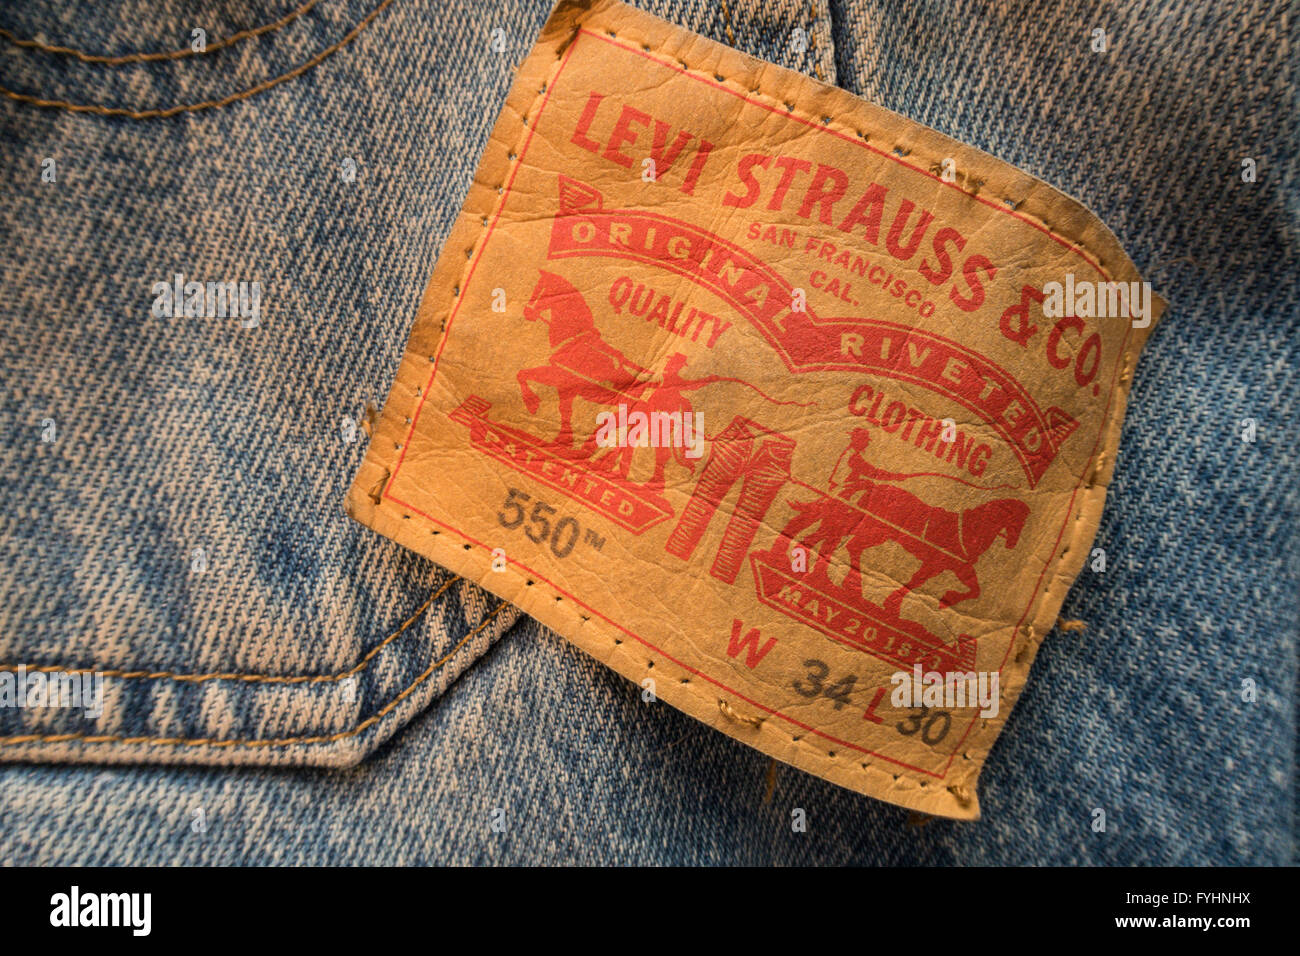 Levi Strauss High Resolution Stock Photography and Images - Alamy